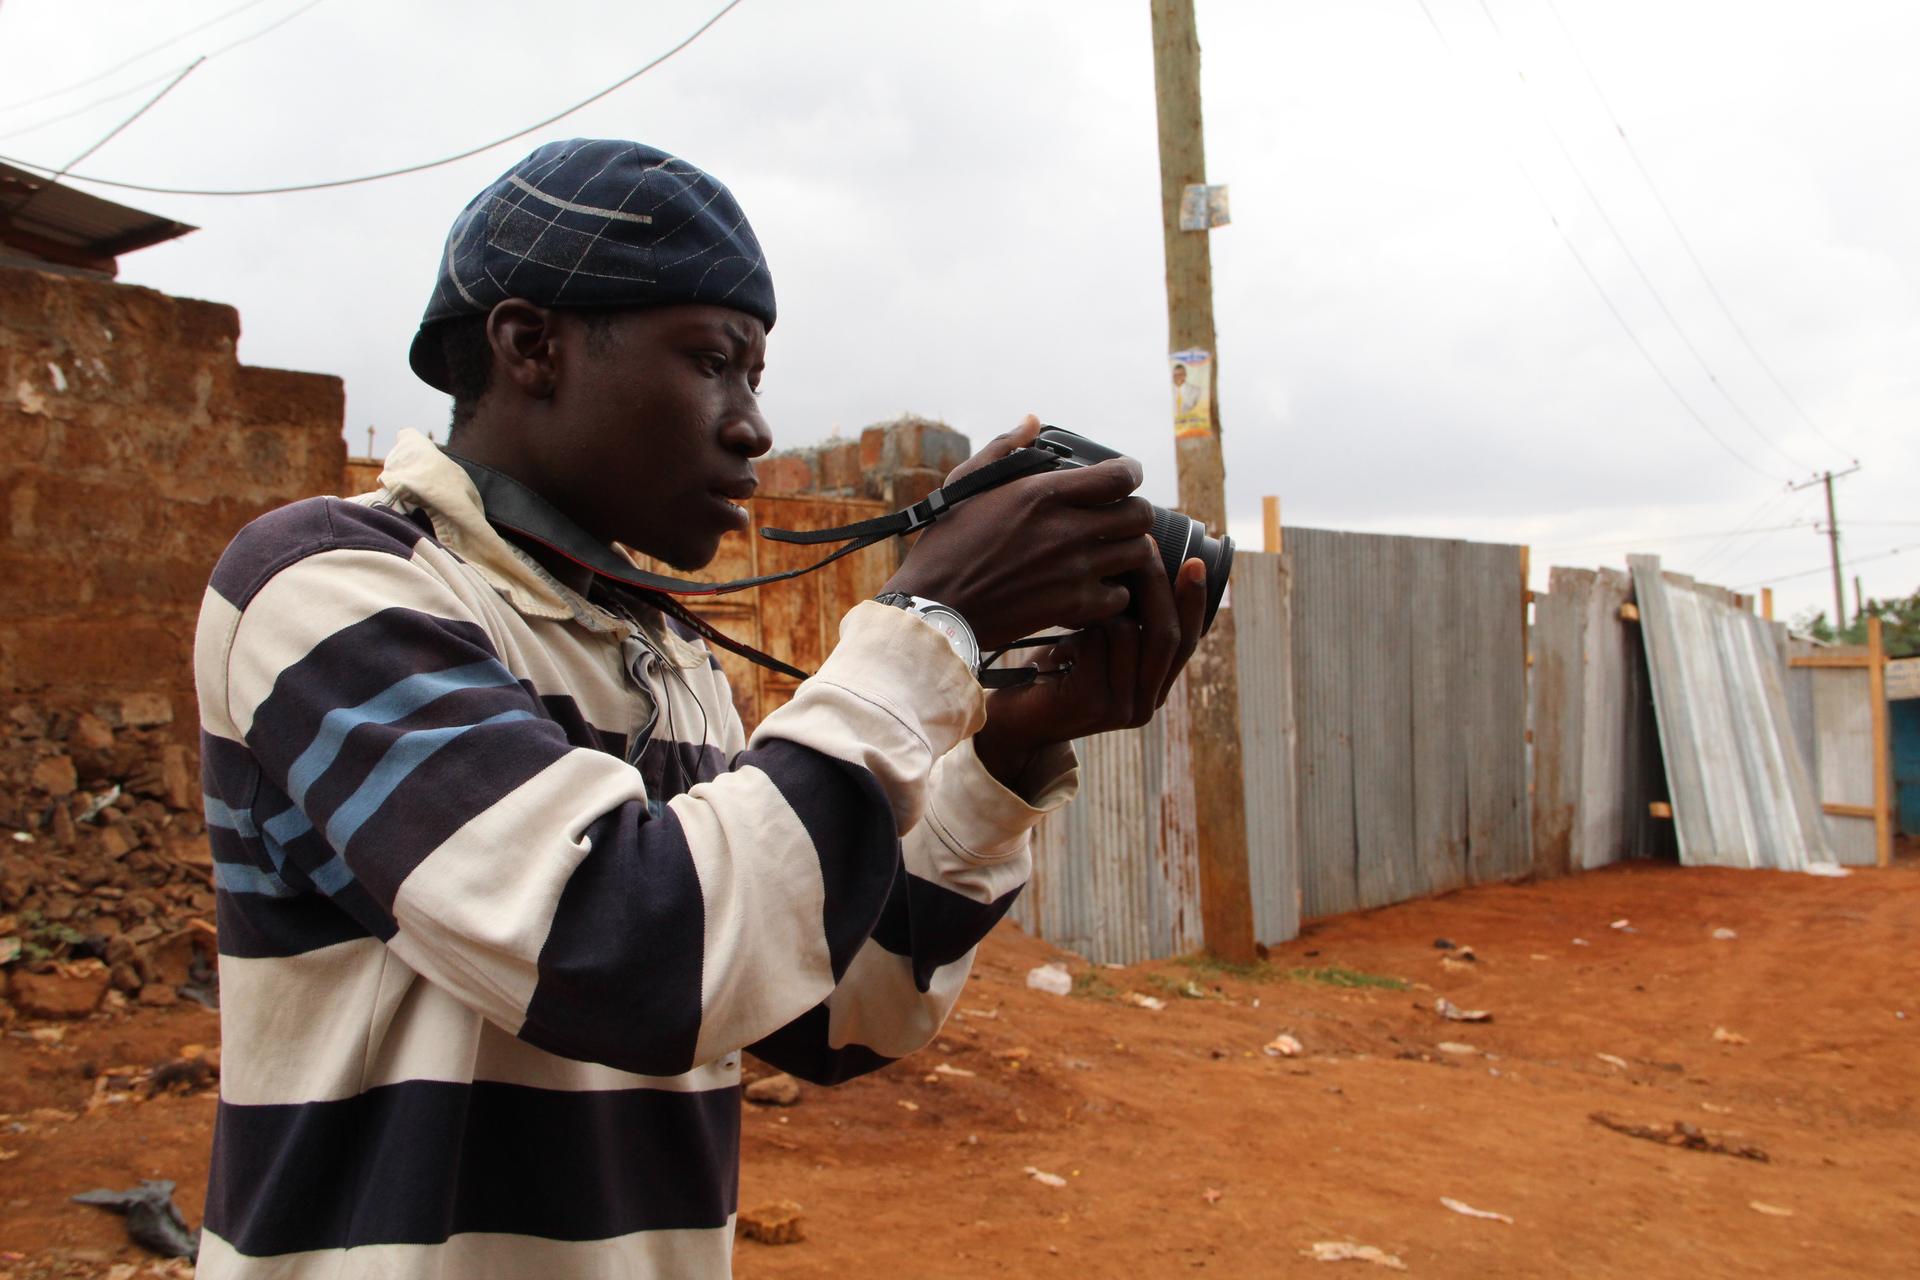 Abbas practices taking pictures with Habari Kibra's only camera. His true passion, though, is making radio.